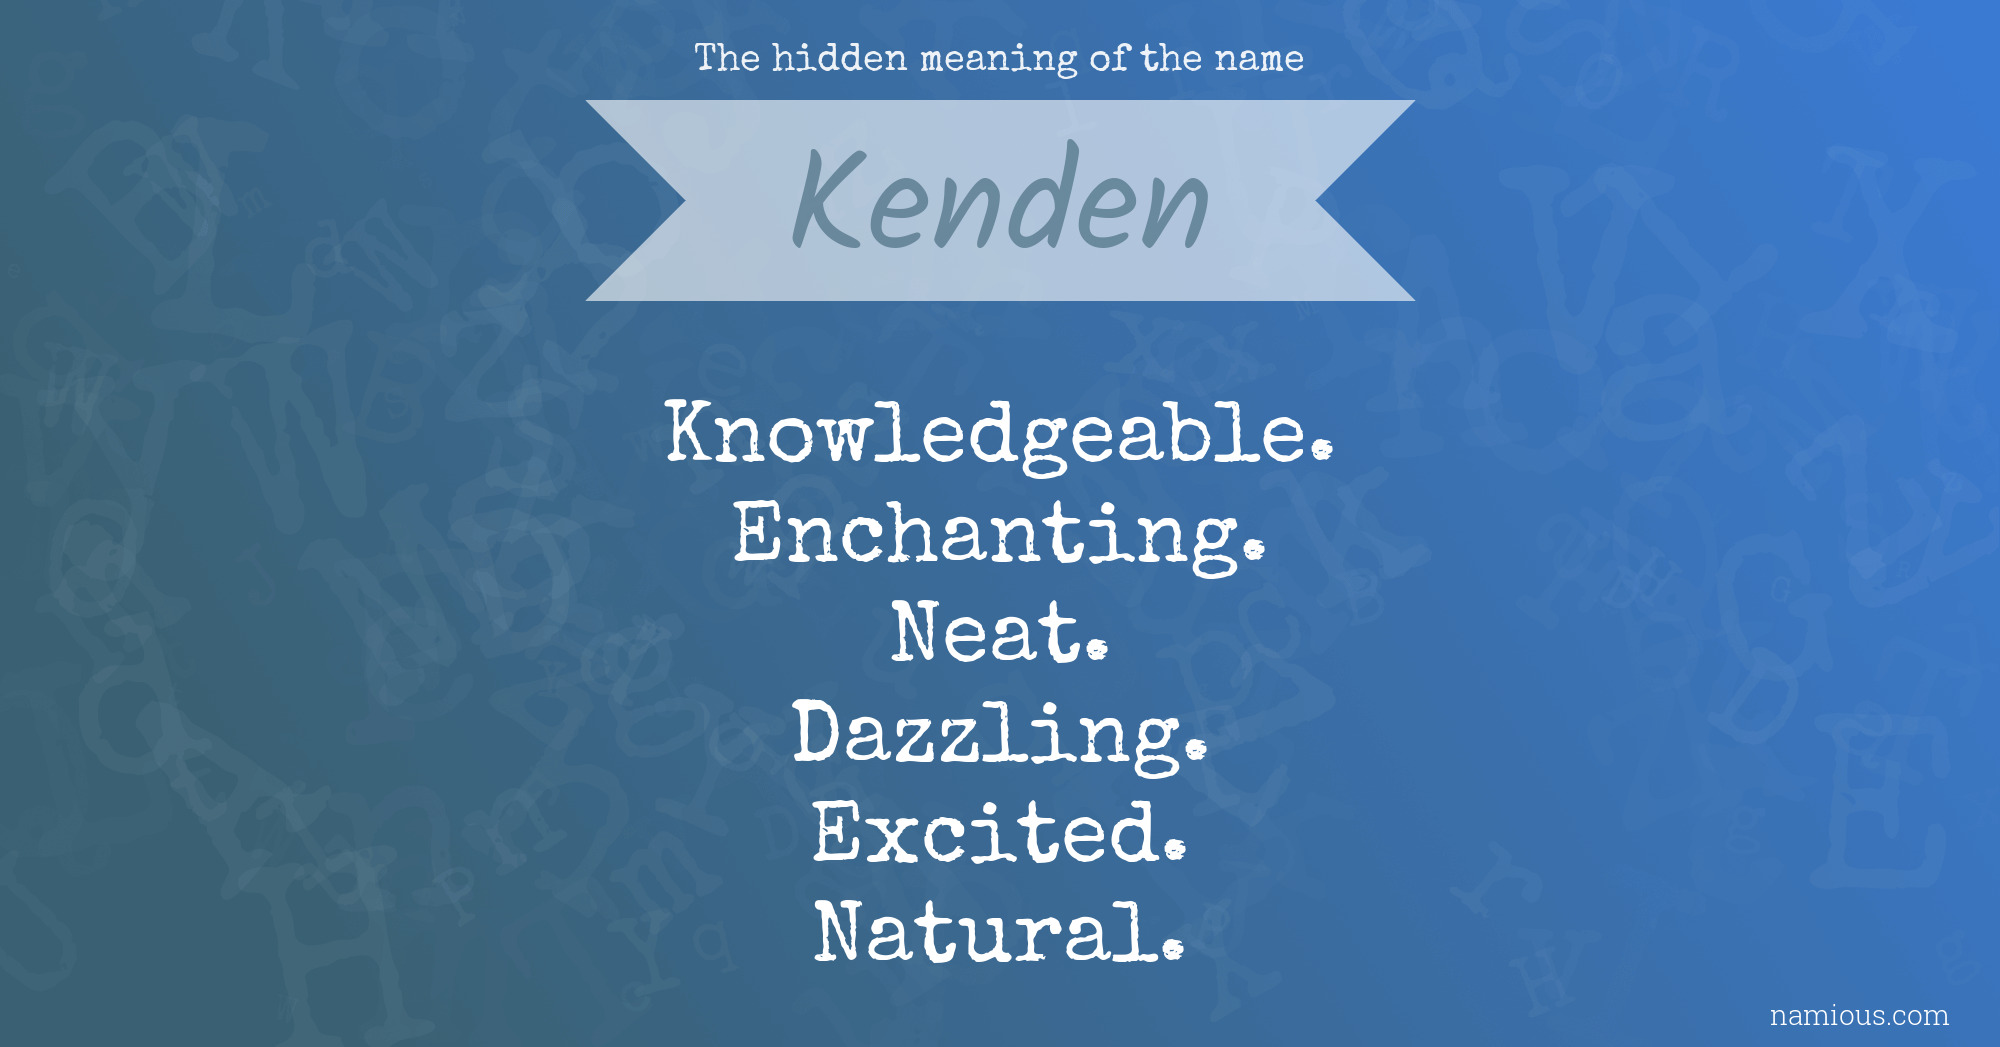 The hidden meaning of the name Kenden